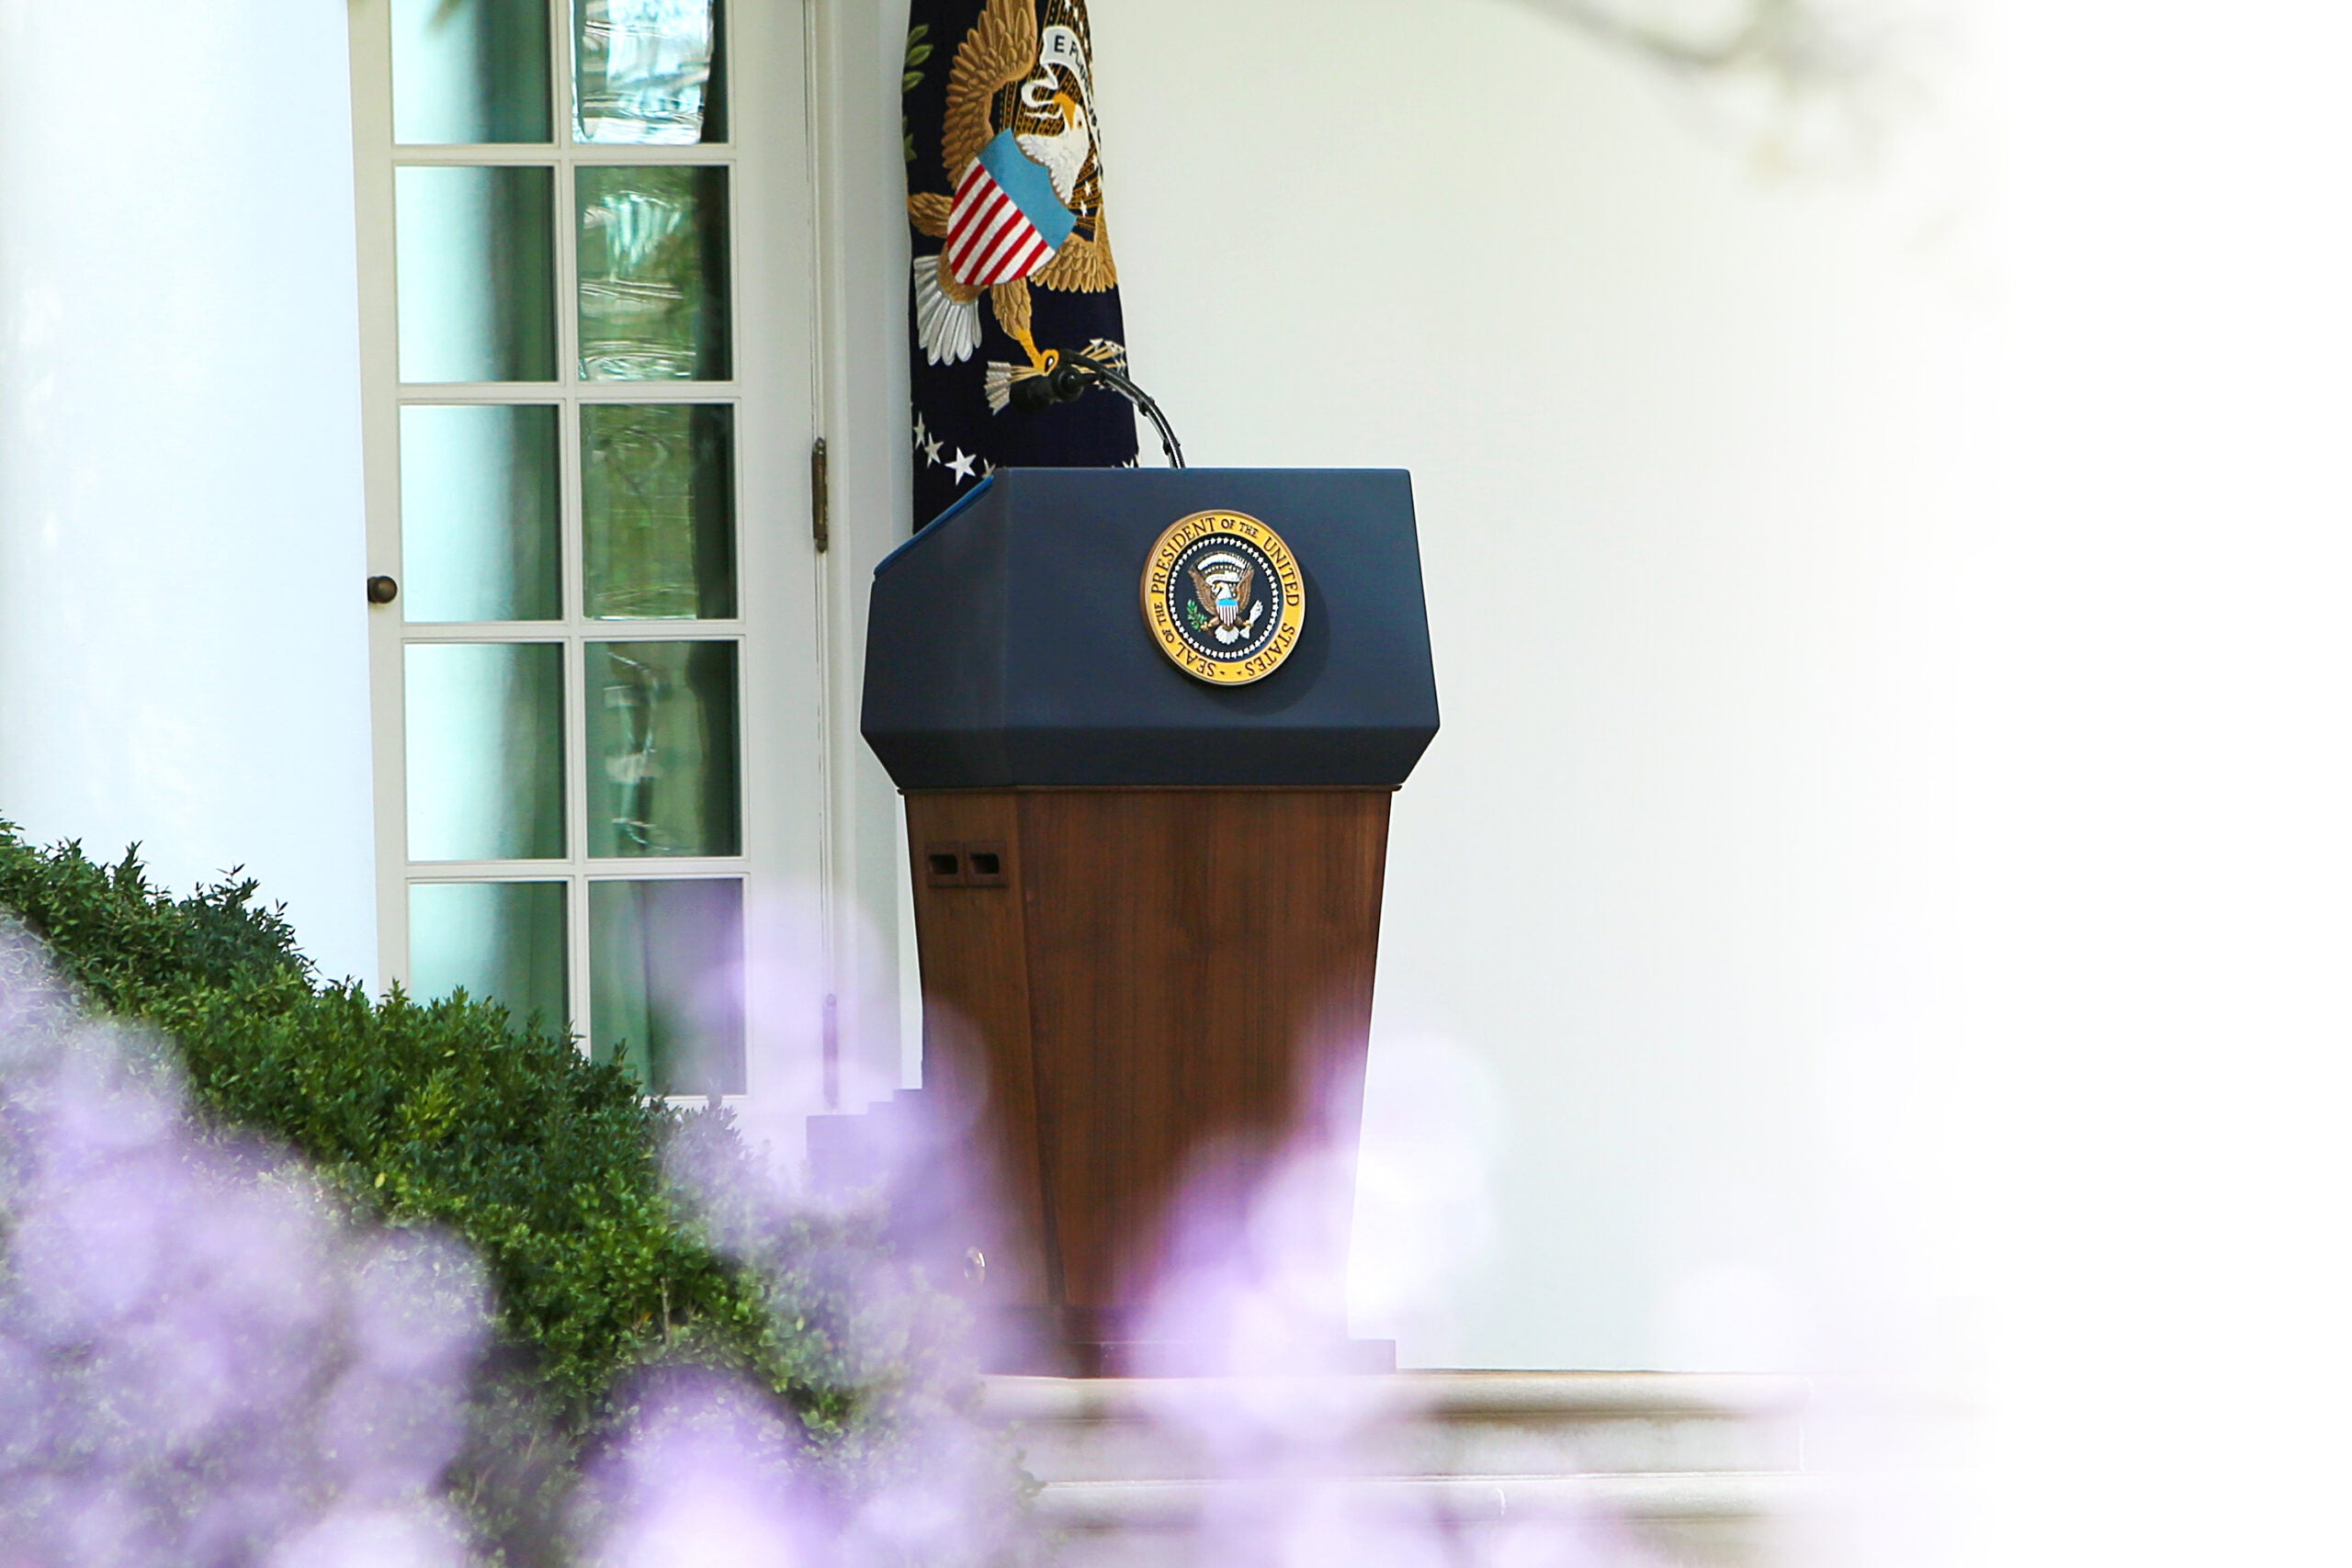 President of the United States Podium outside next to a paneled glass door.